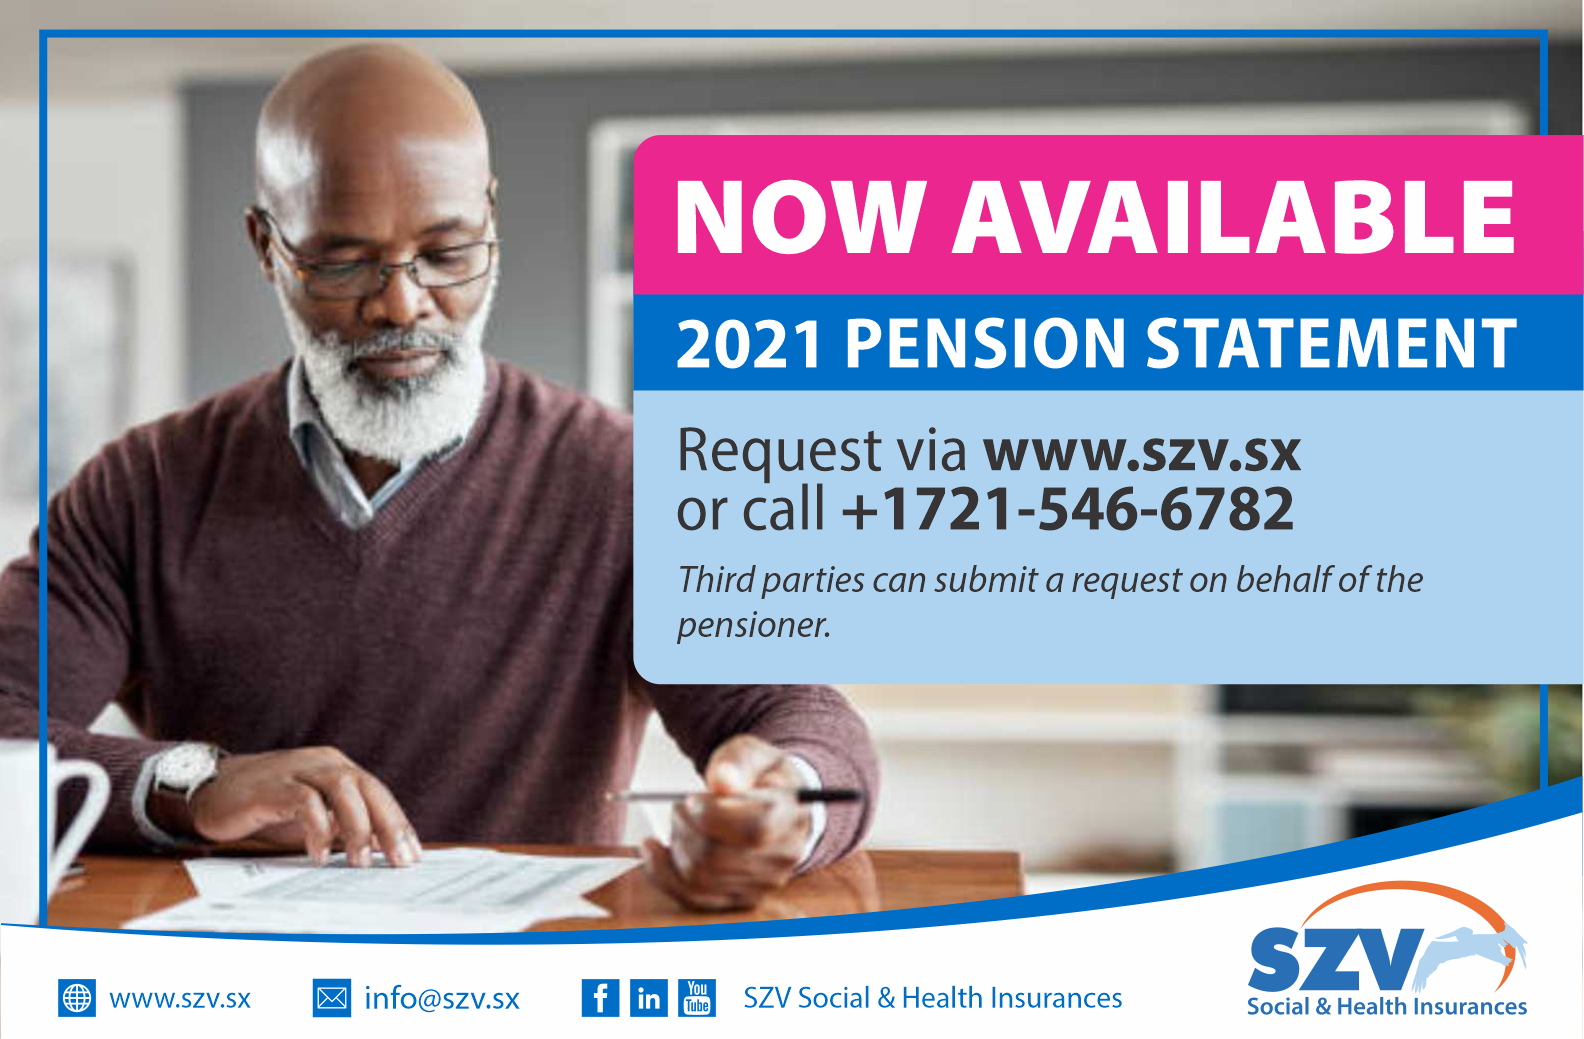 2021 Pension Statement Now available